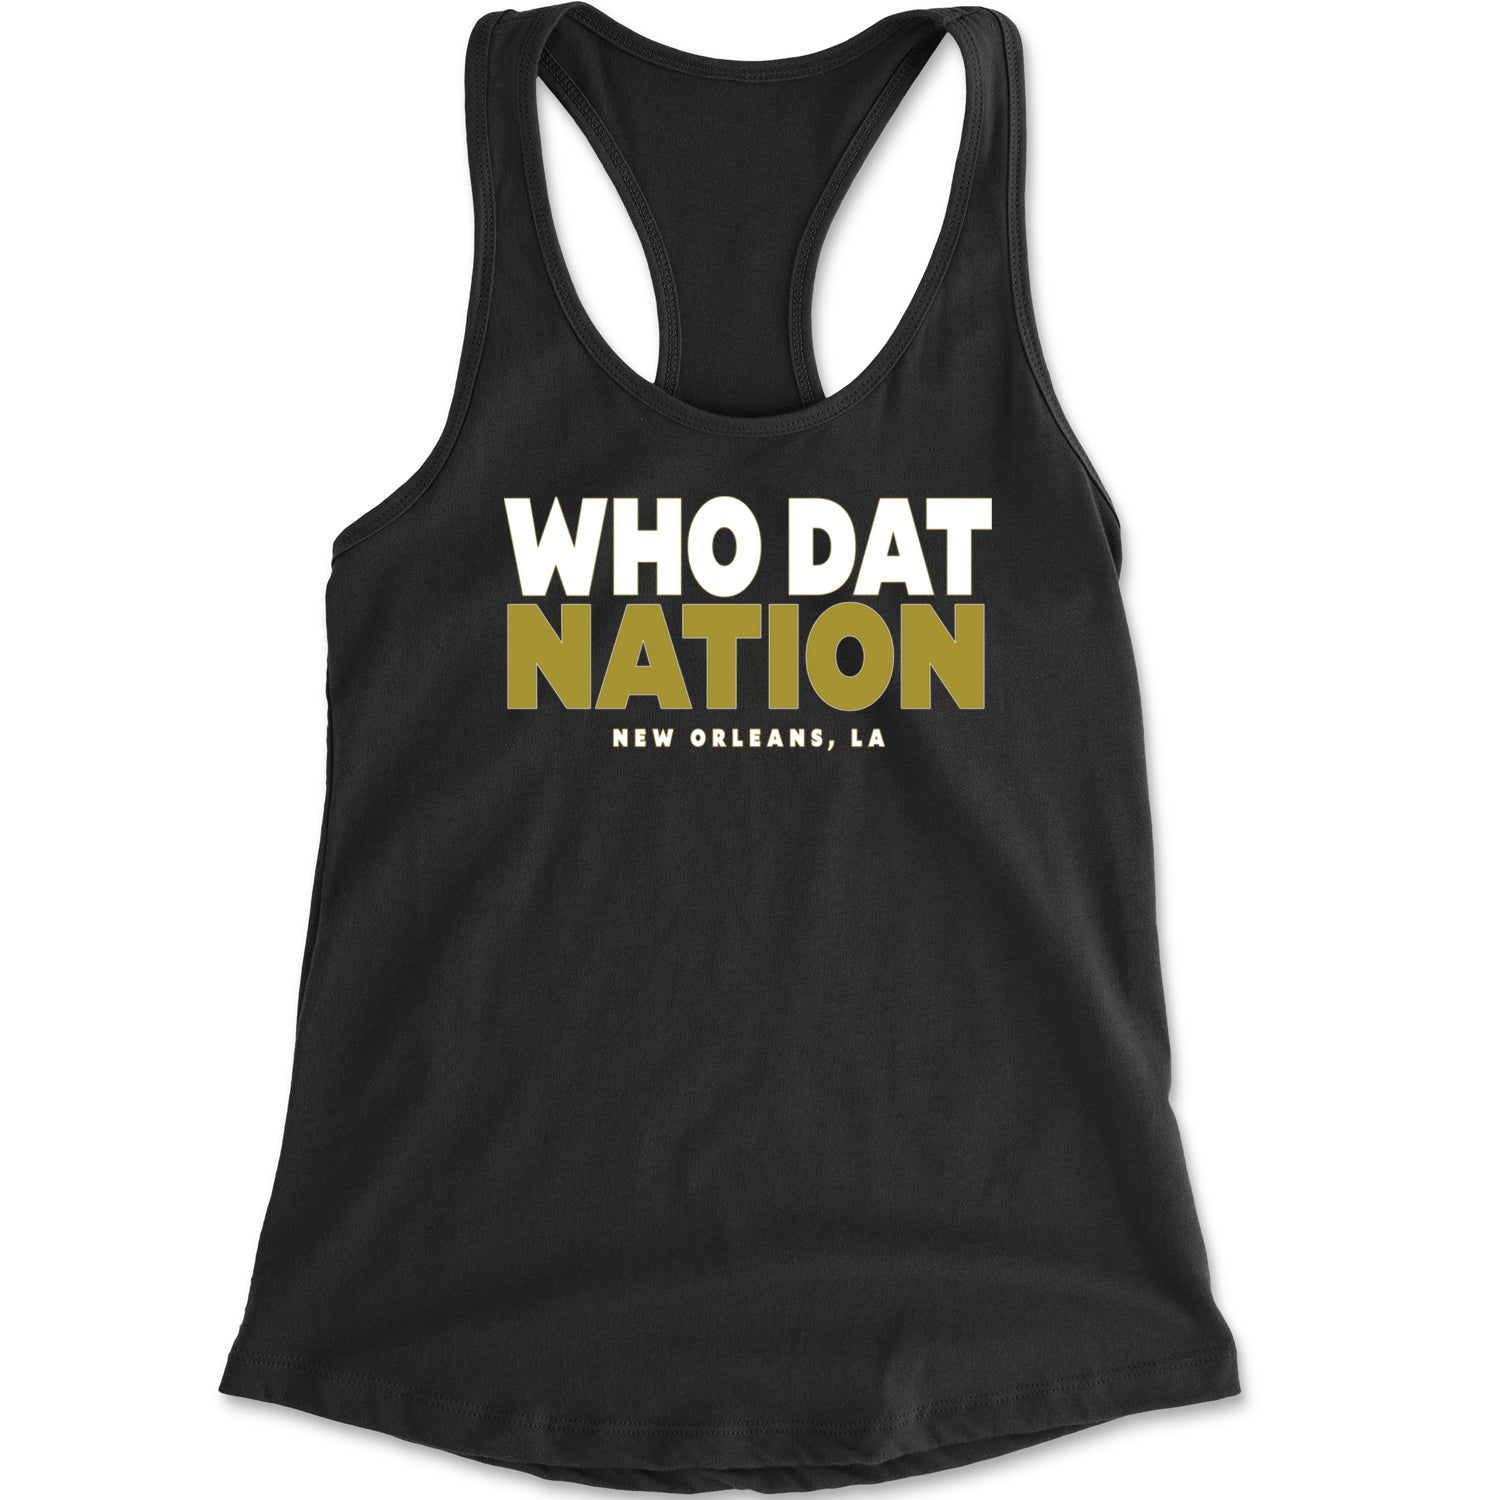 New Orleans Who Dat Nation Racerback Tank Top for Women